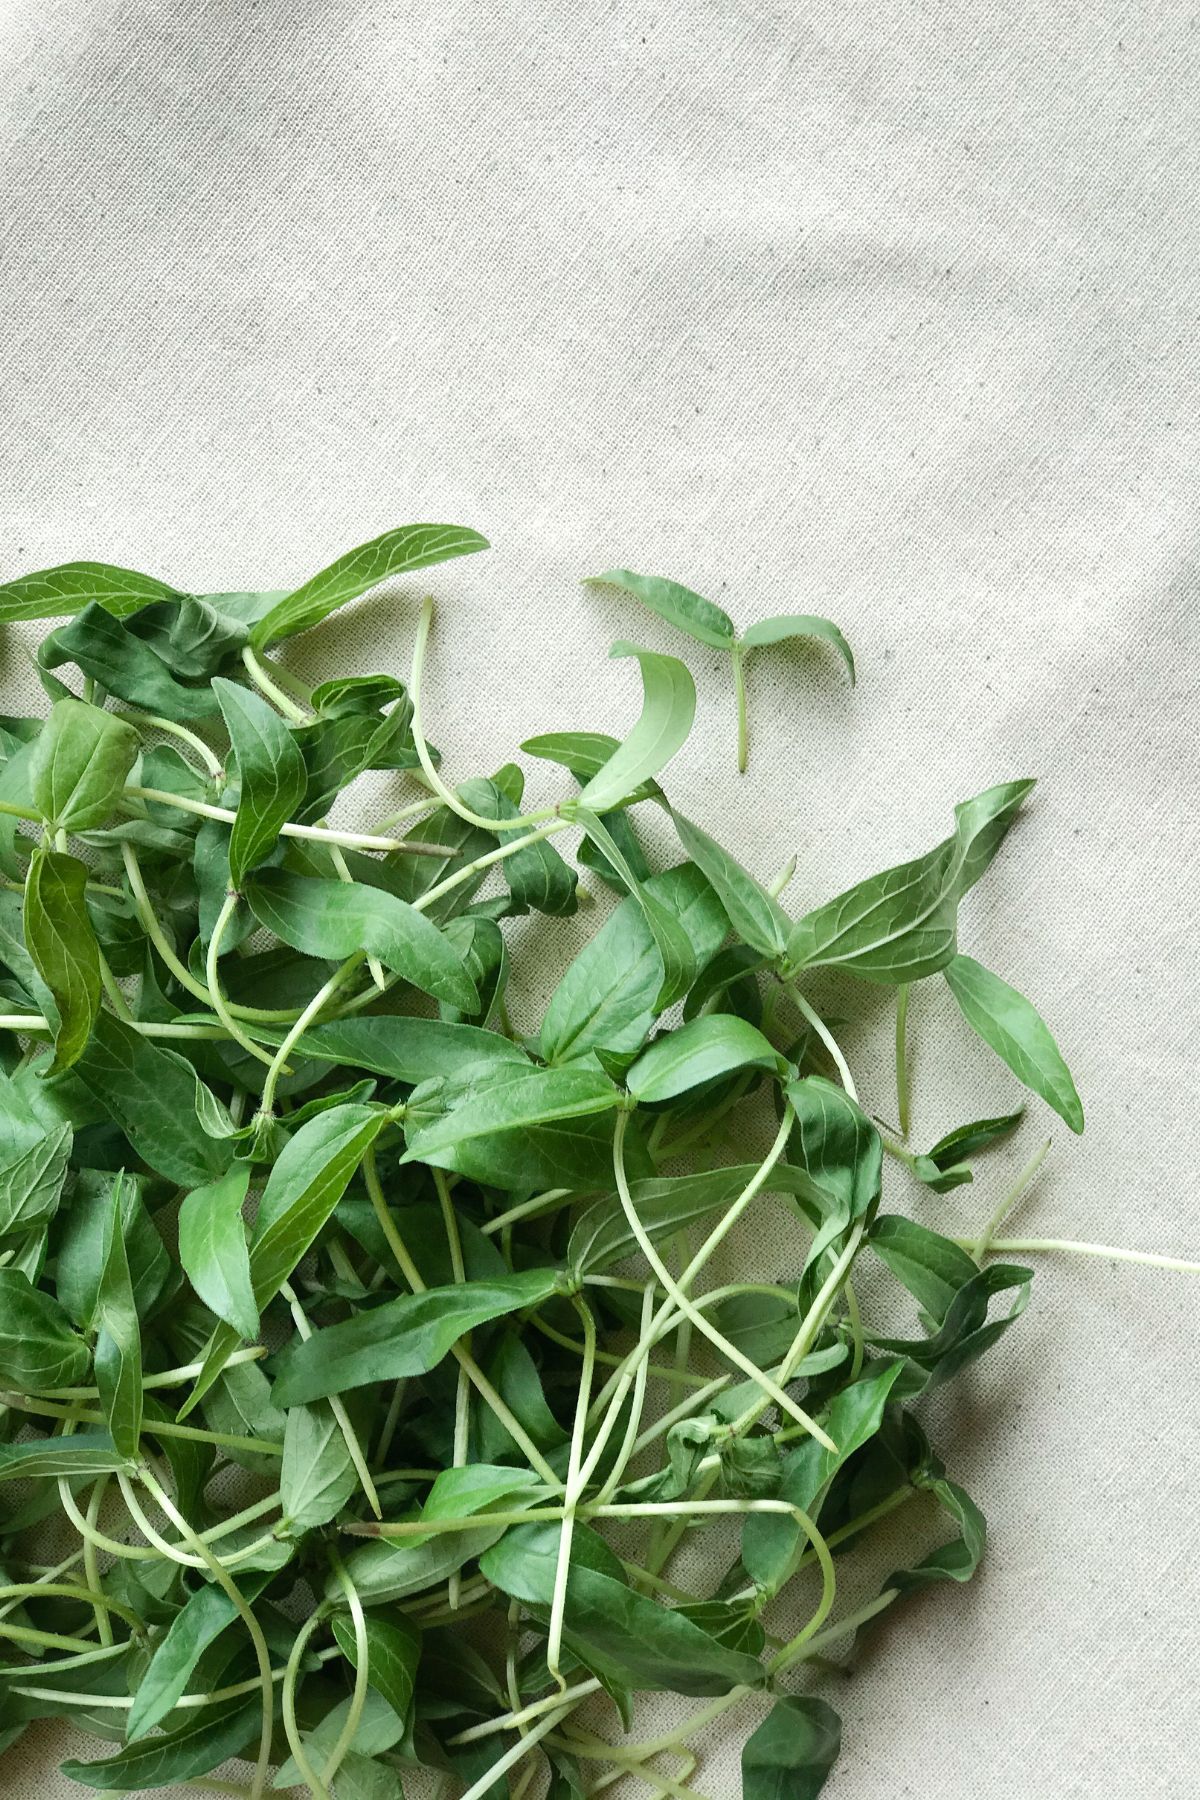 harvested spinach microgreens on a white cloth.